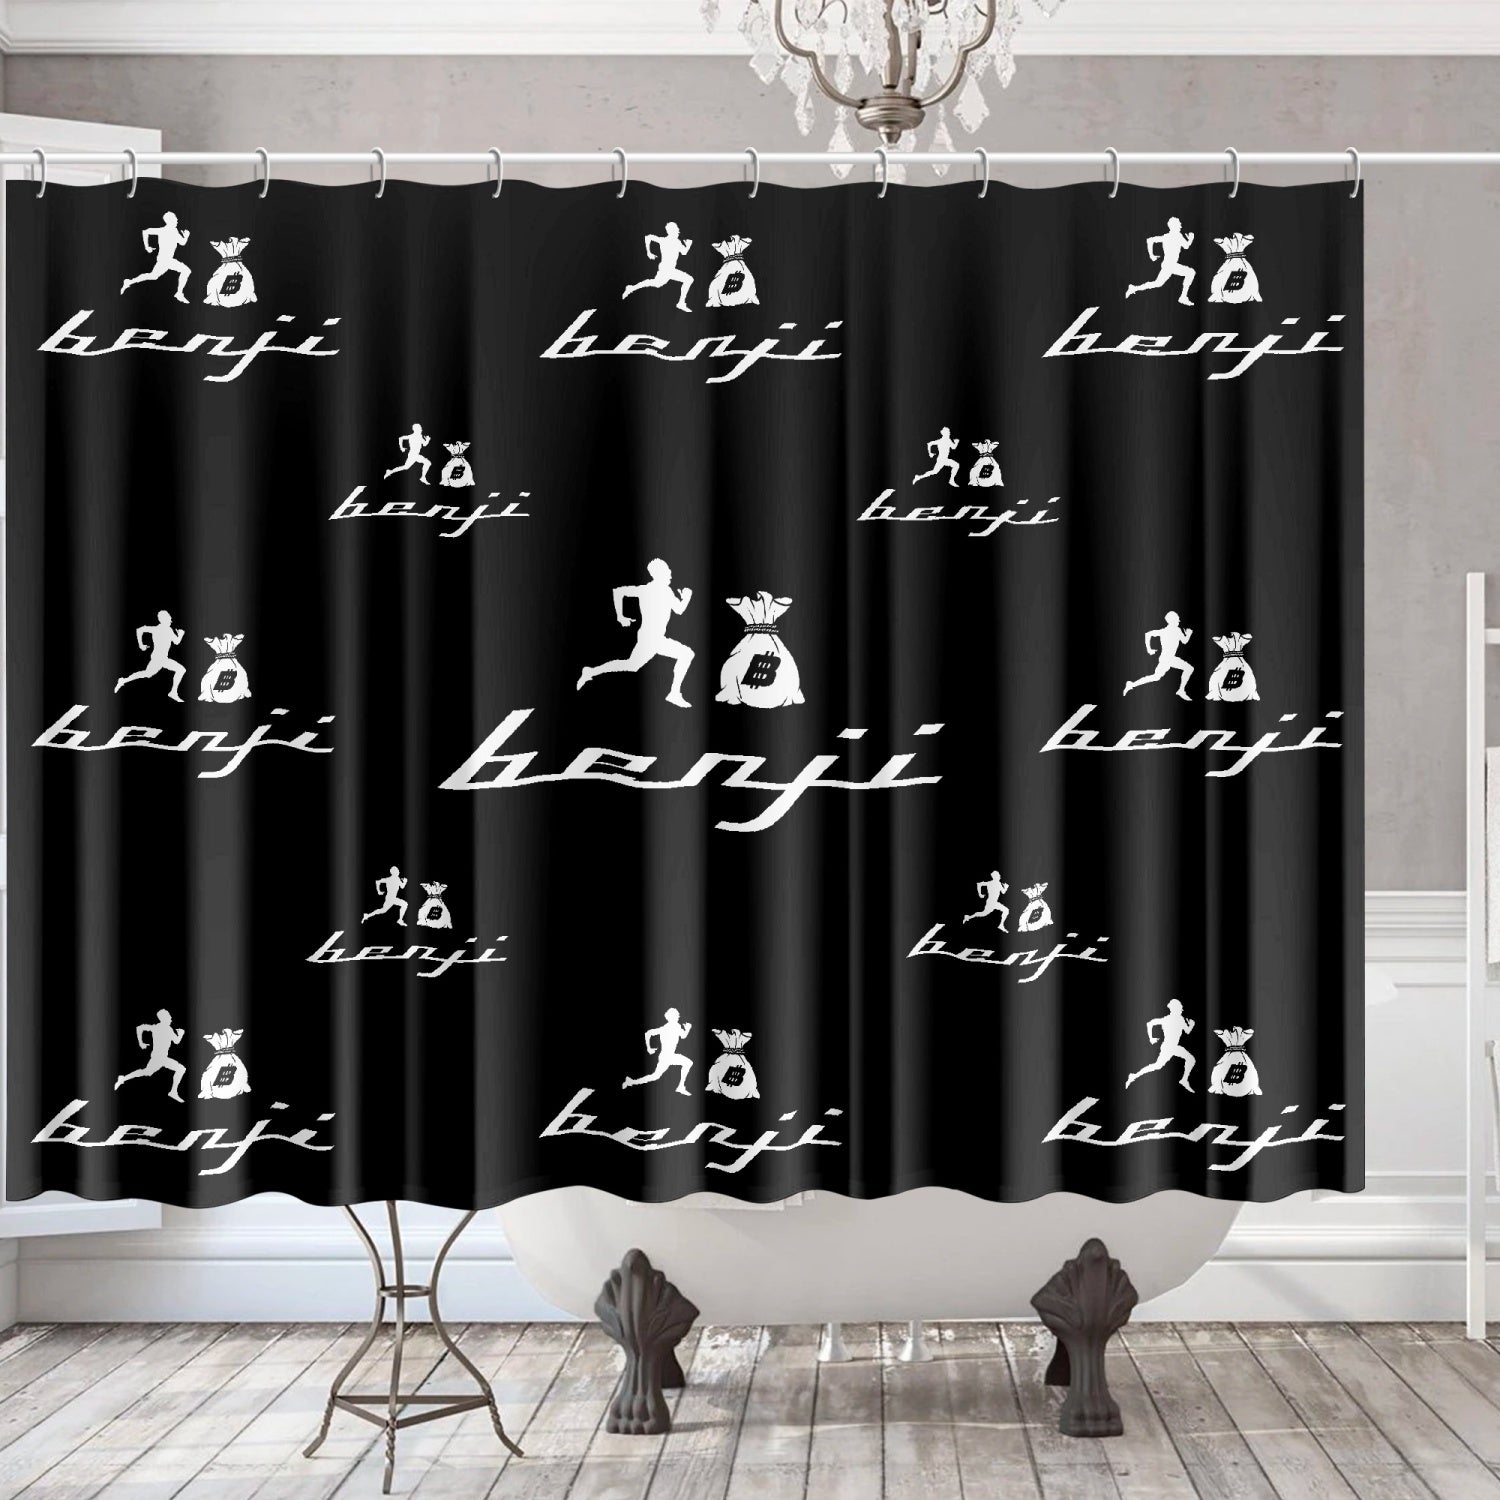 Crock's Look Black And White Shower Curtain by Ben Yassa - Pixels